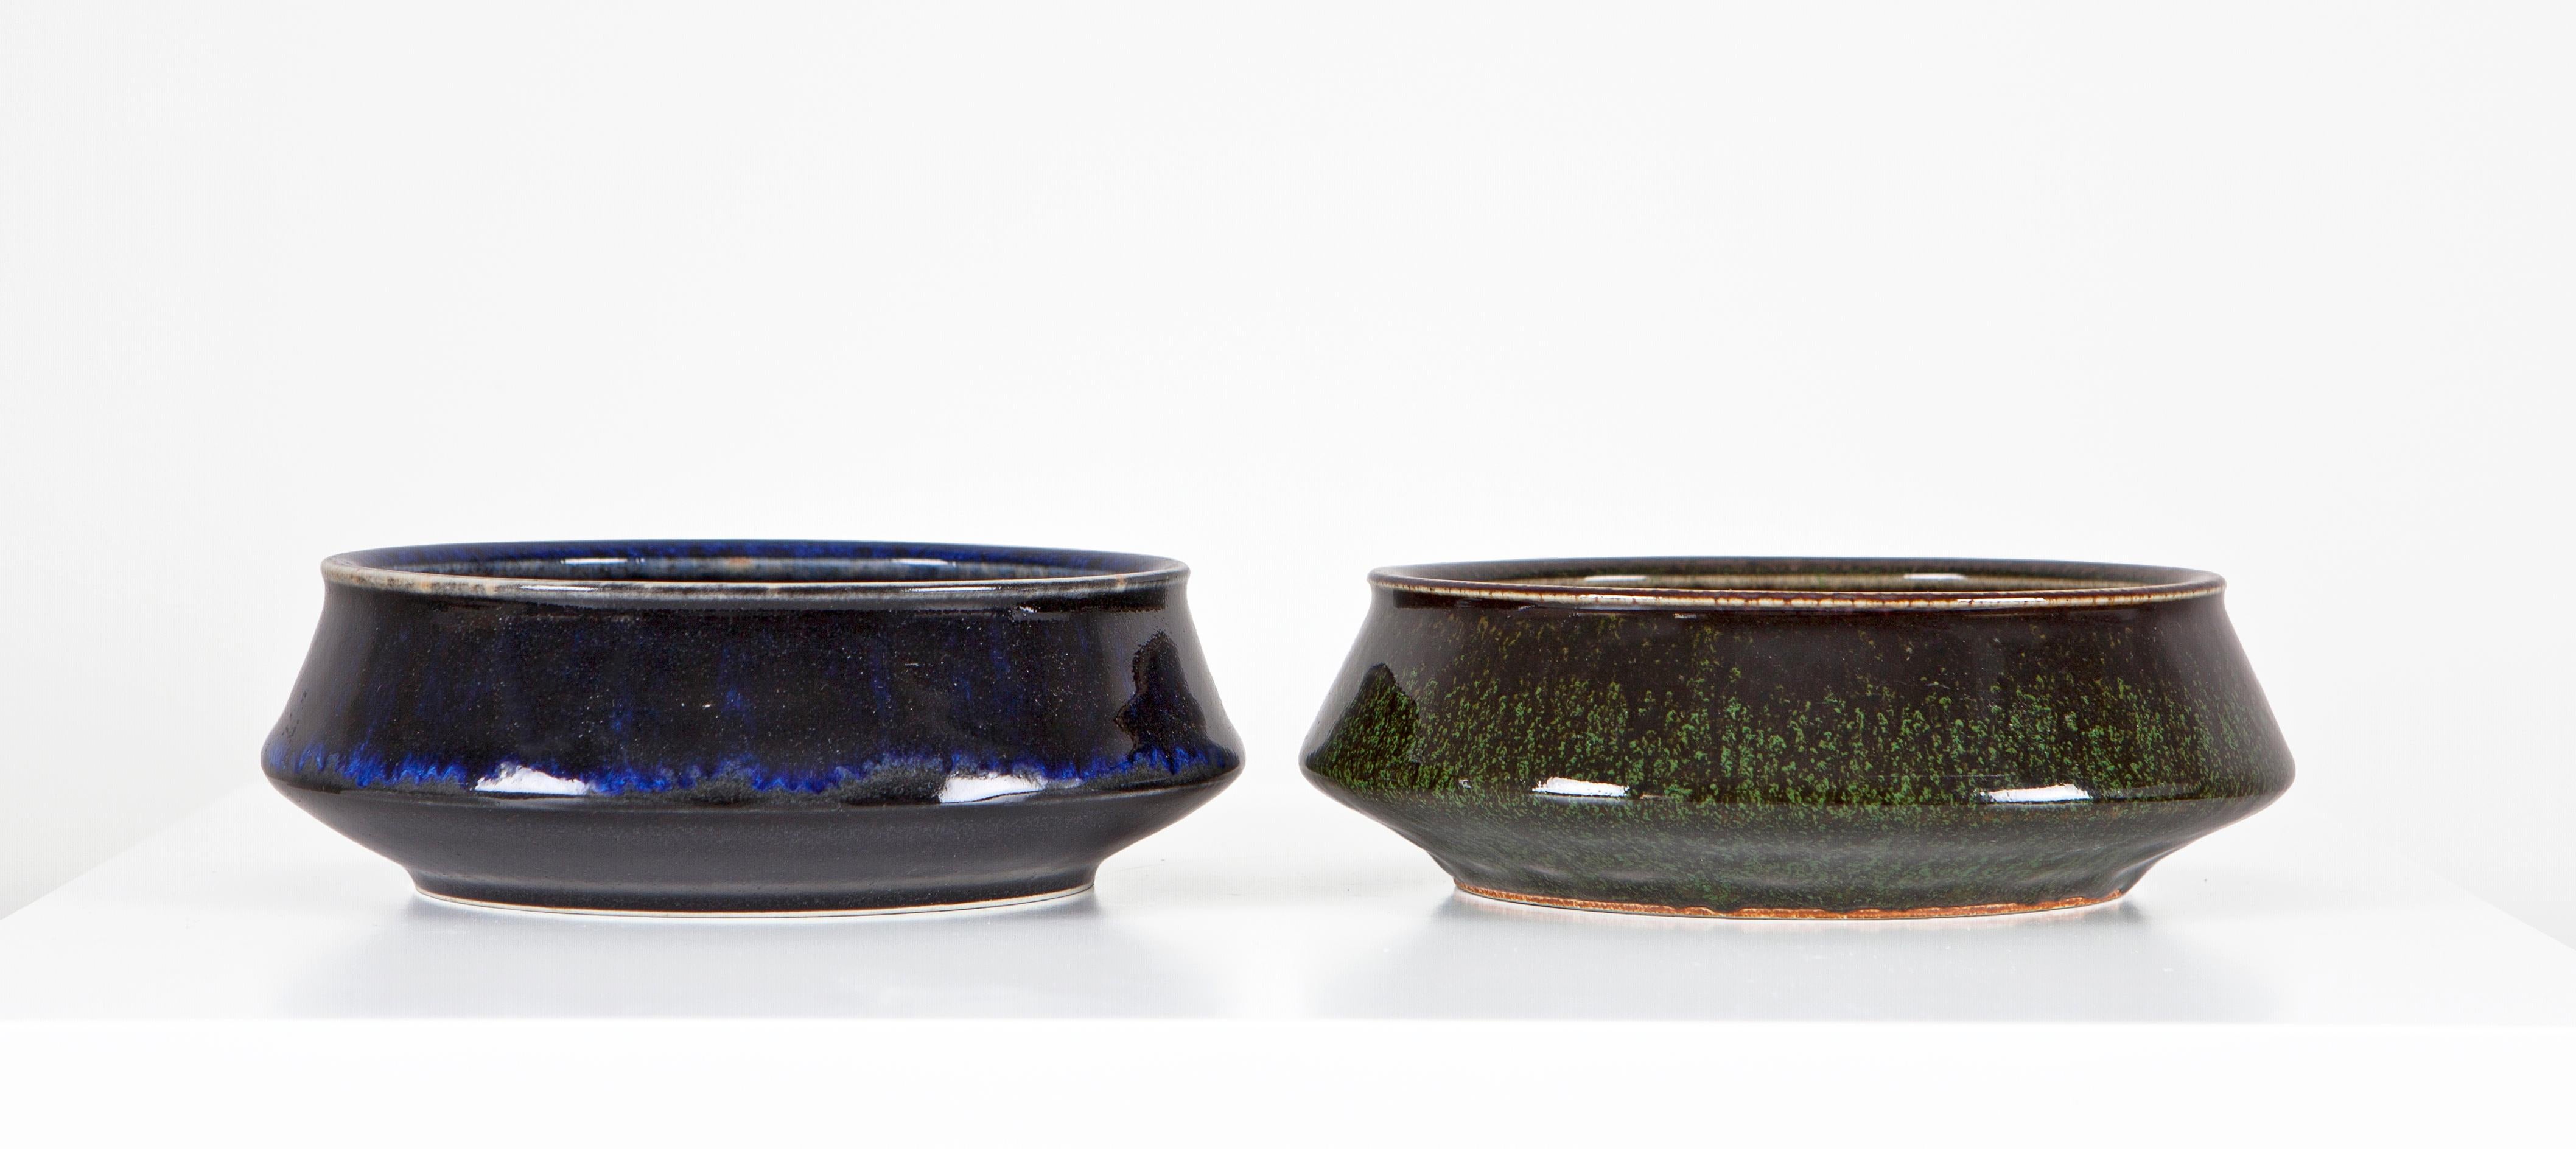 Pair of glazed Stoneware bowls by Carl Harry Stalhane for Rörstrand. Sweden, 1960s.
Very good condition, vintage product without defects.
 